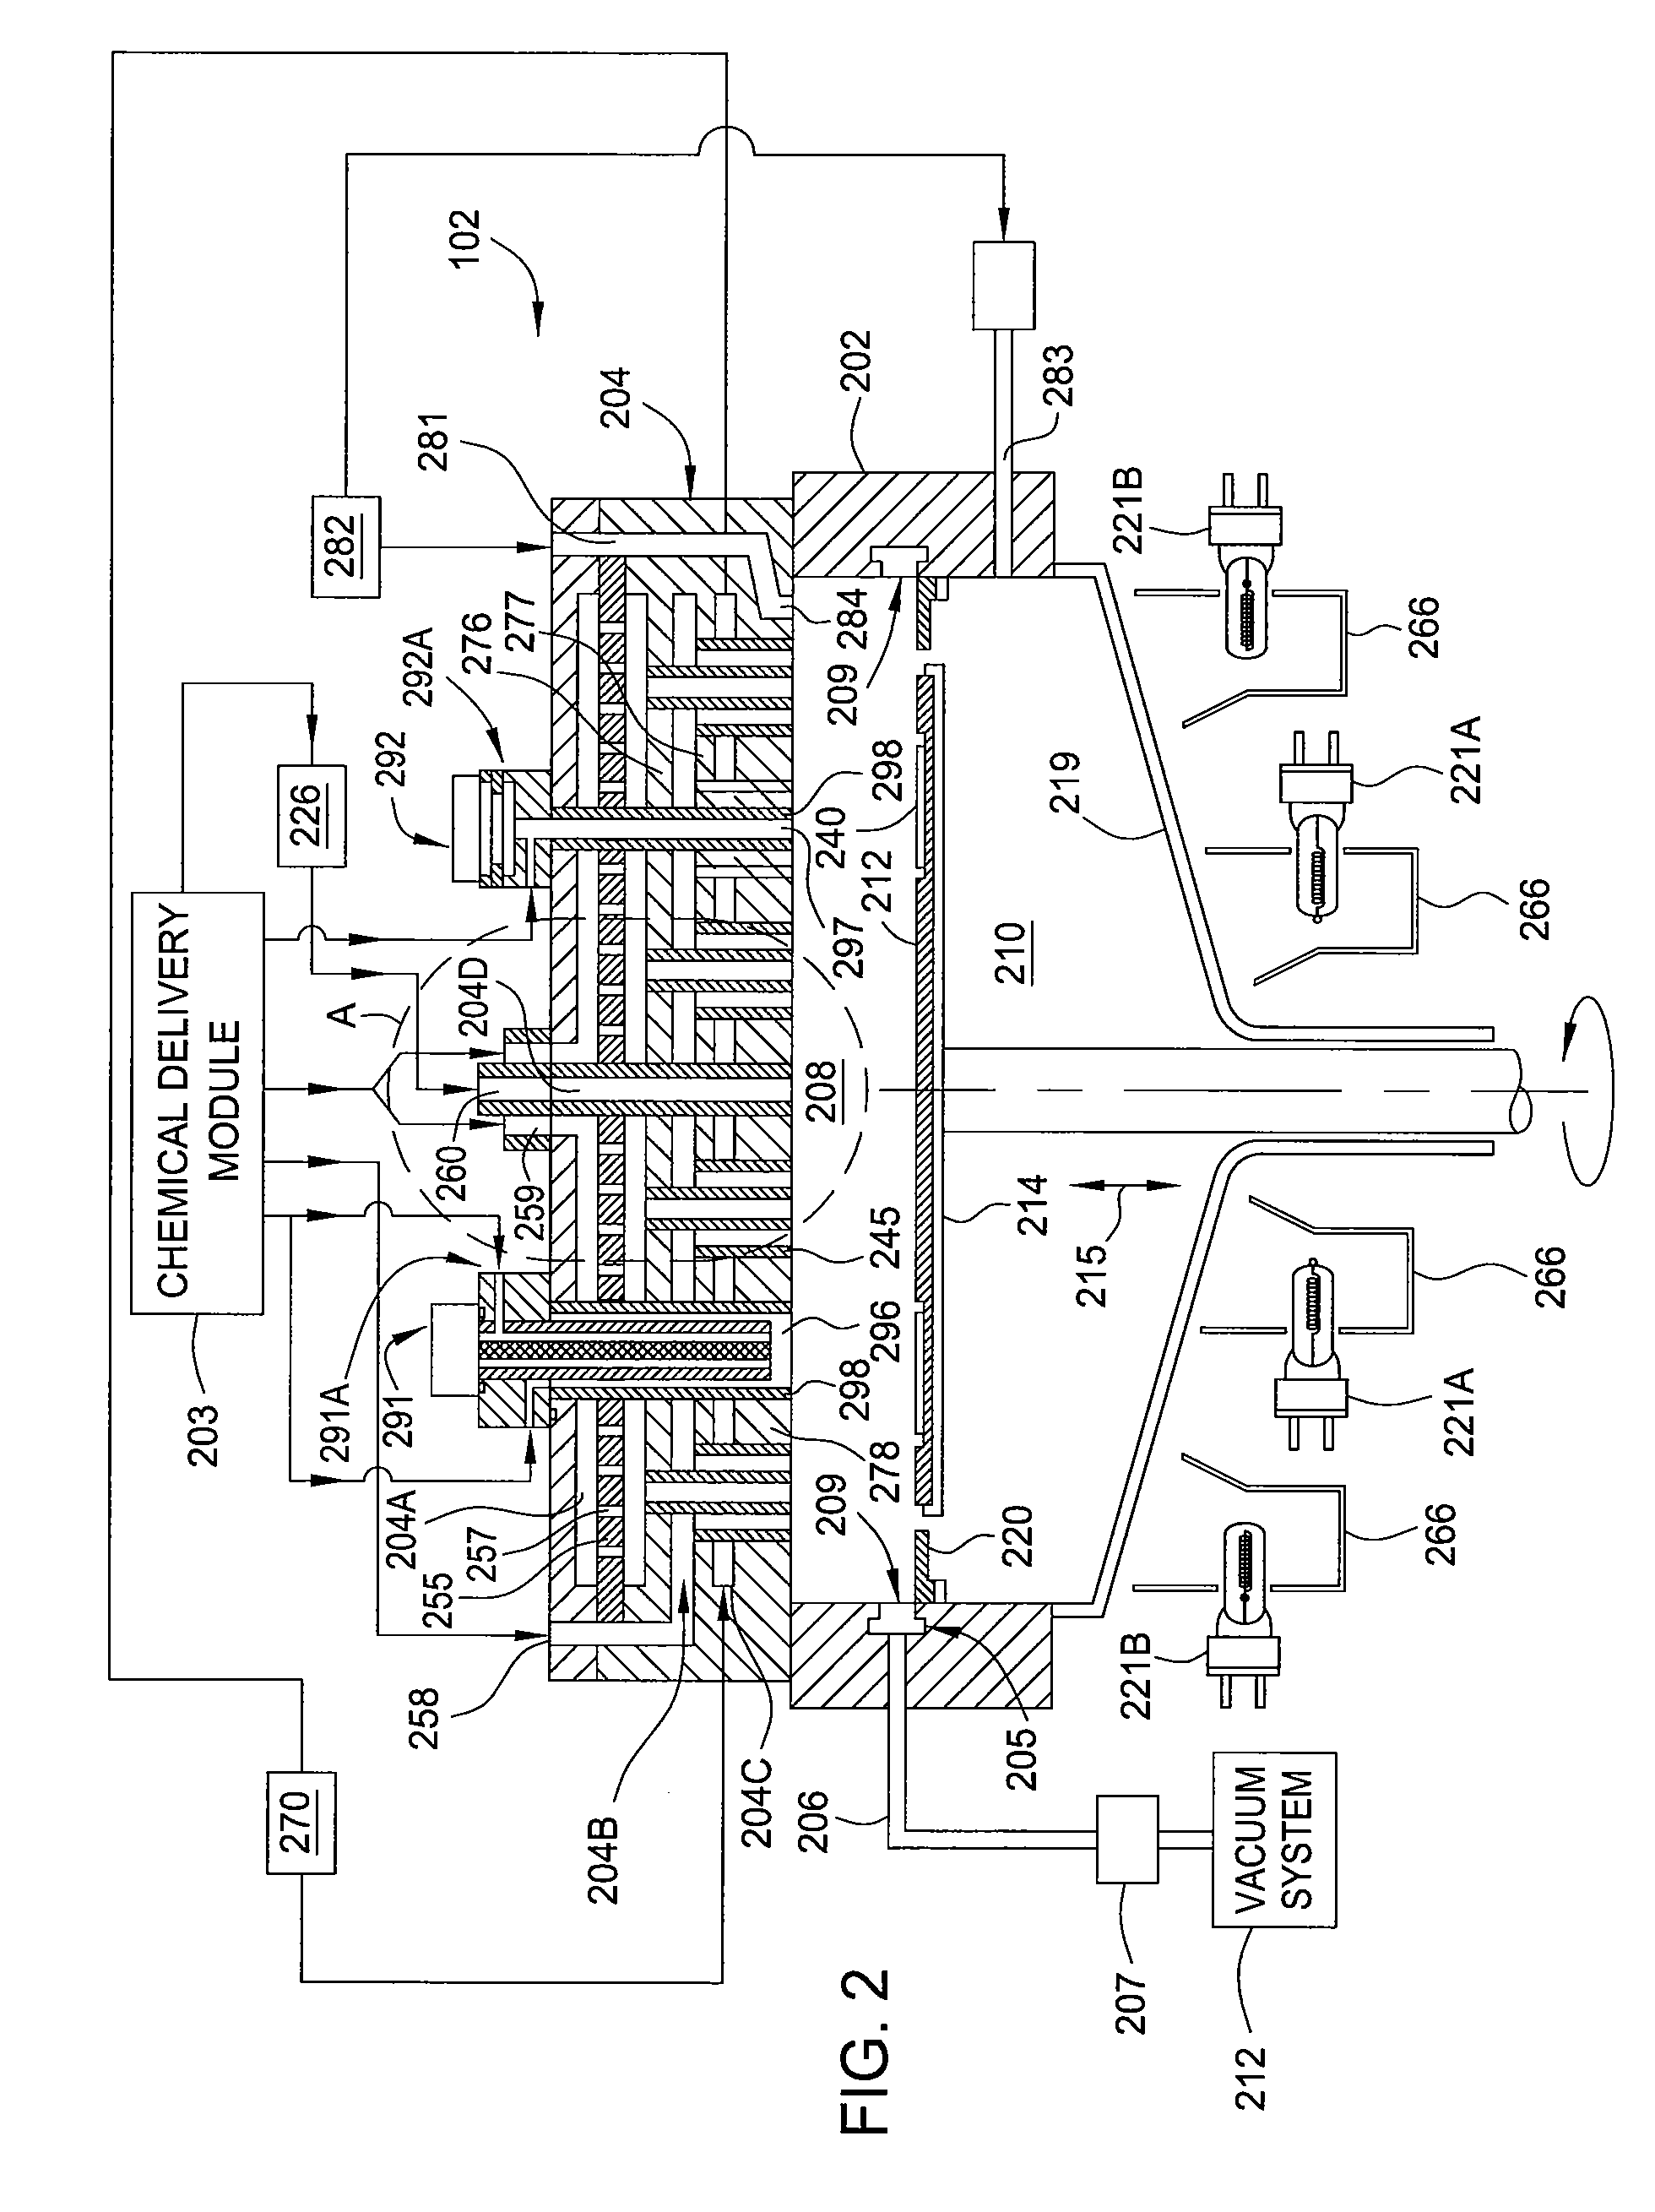 Multiple precursor showerhead with by-pass ports